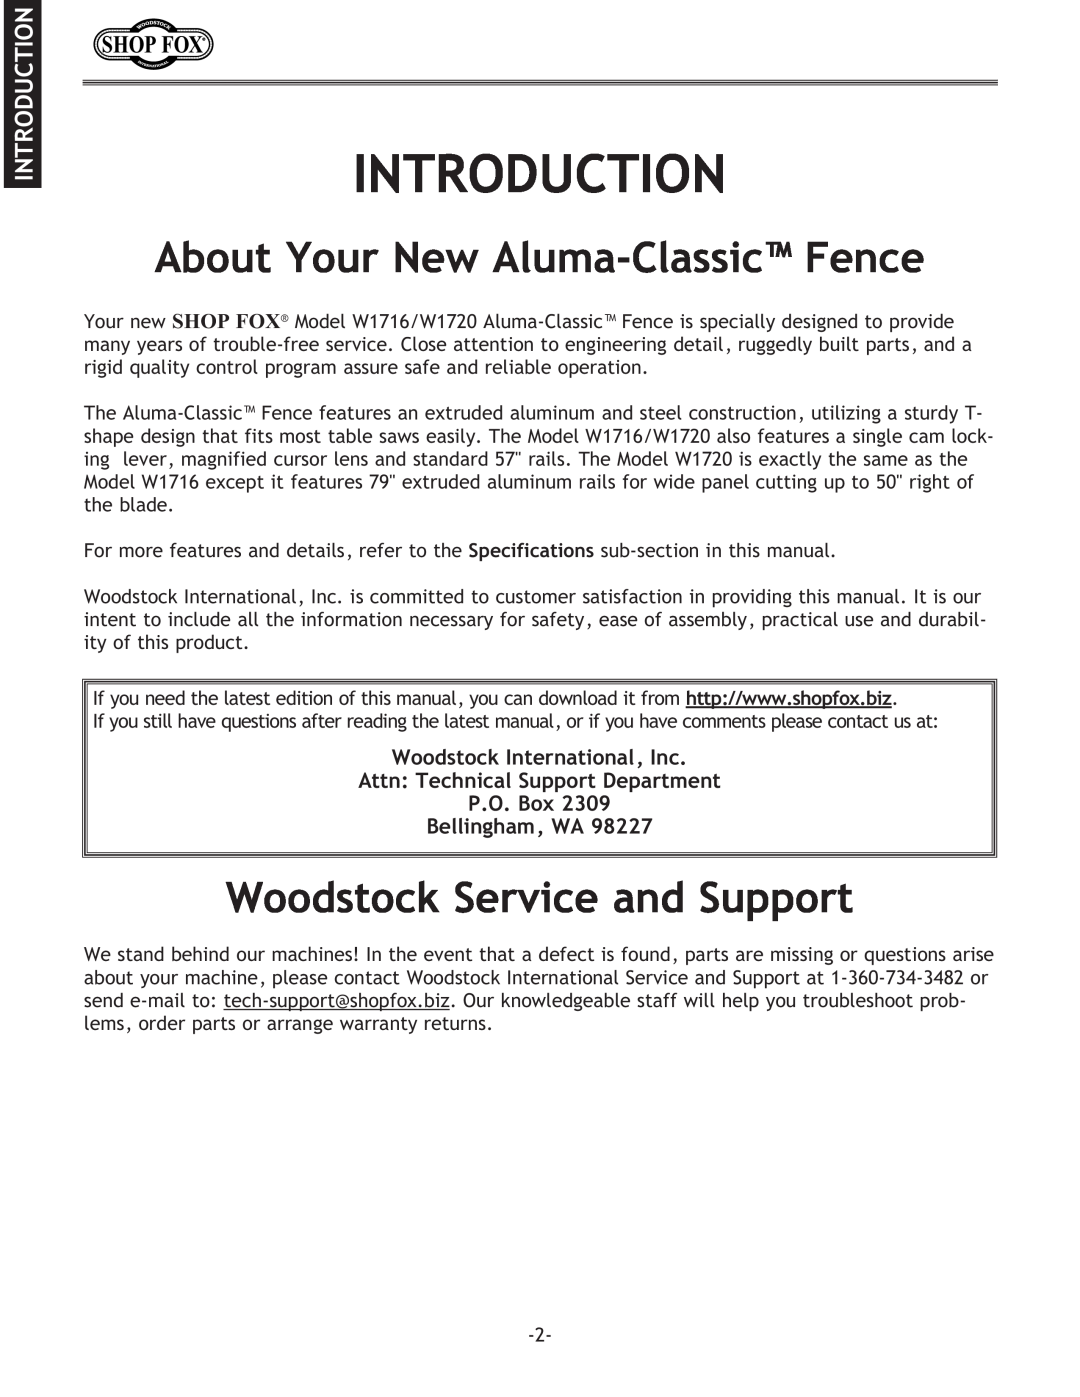 Woodstock W1716, W1720 Introduction, About Your New Aluma-ClassicFence, Woodstock Service and Support, Bellingham, WA 